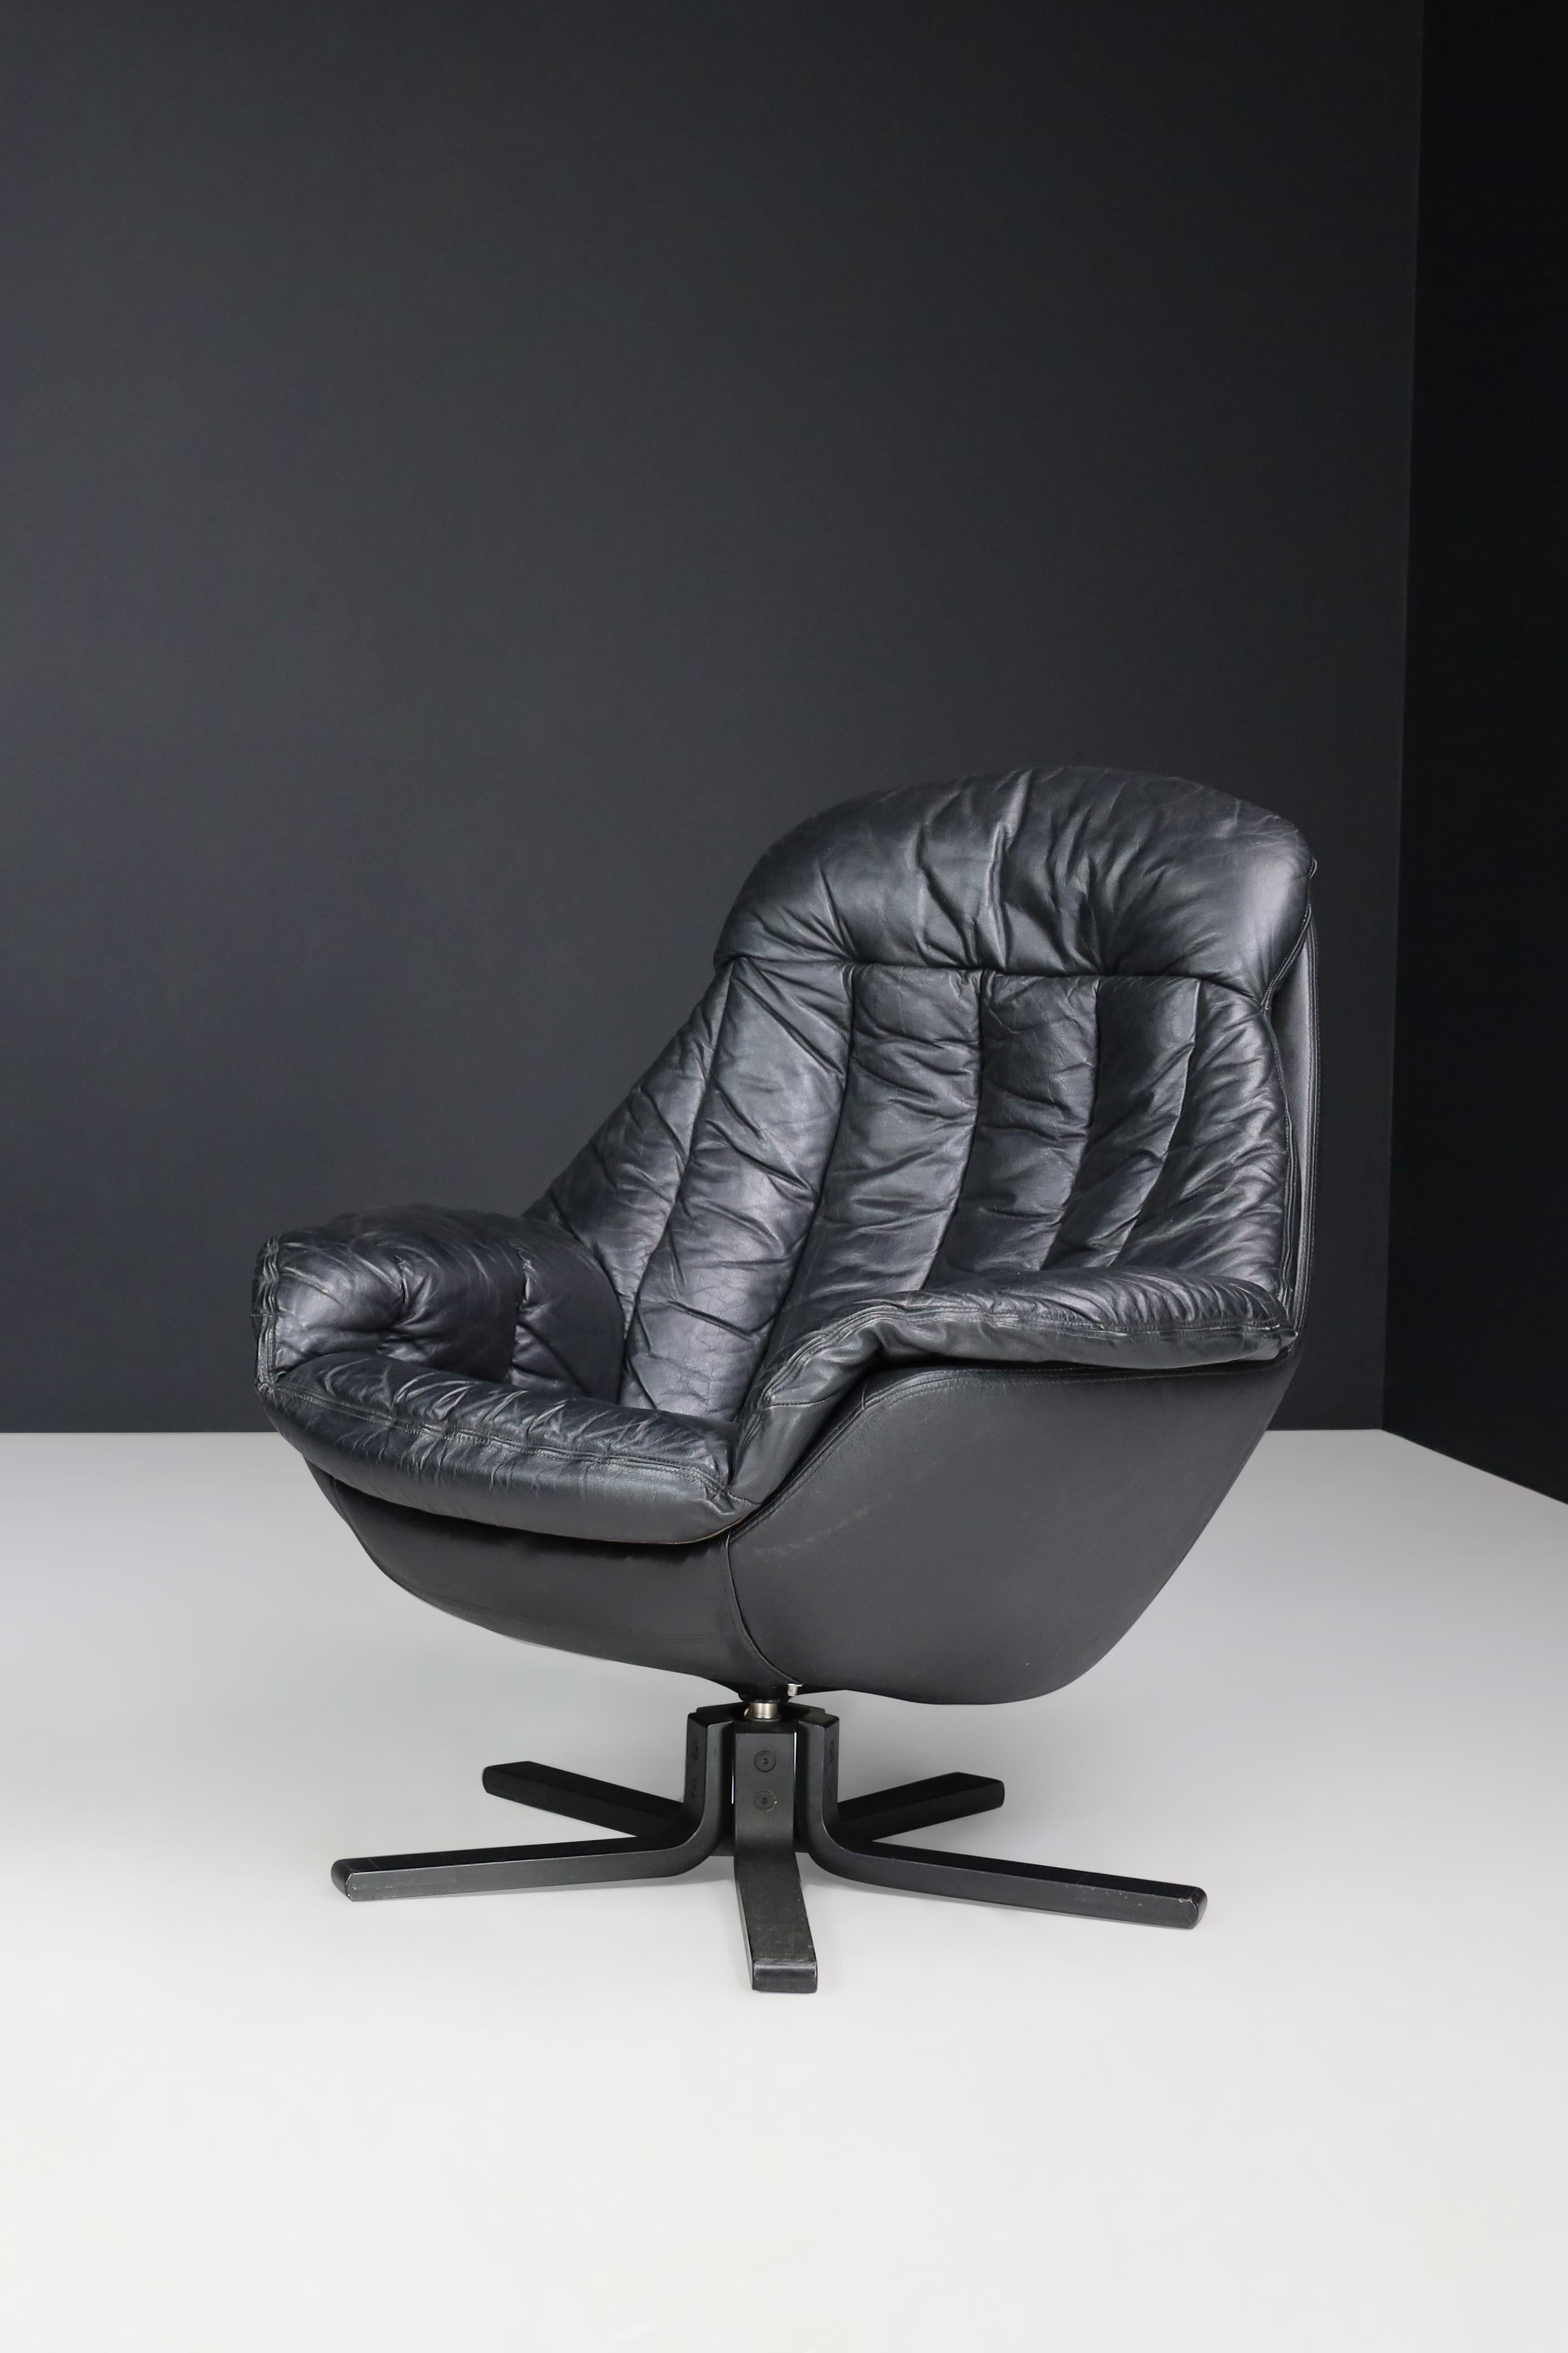 H.W. Klein for Bramin Leather Swivel Lounge Chairs, Denmark 1970s For Sale 4